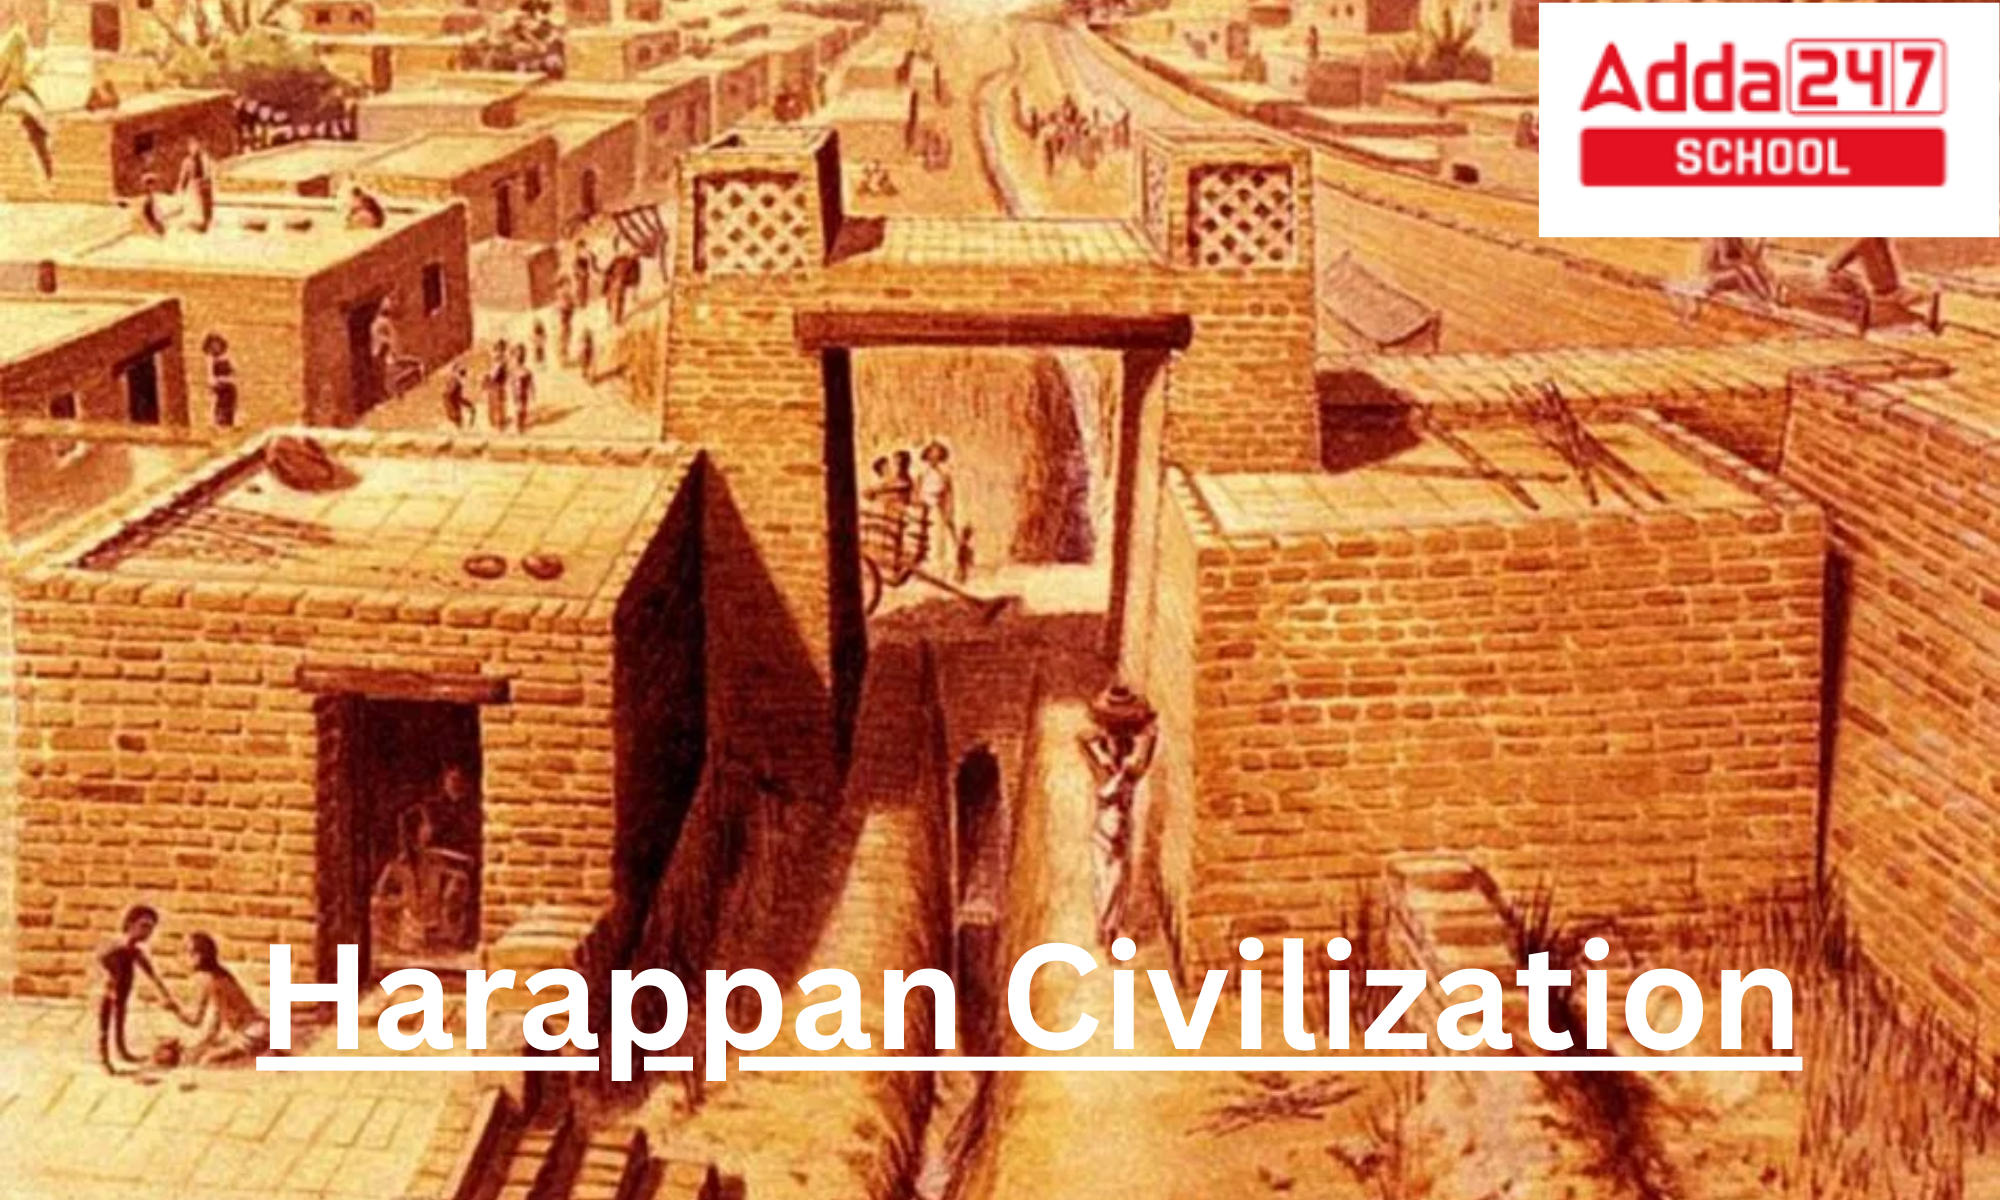 Harappan Civilization Time Period, Map, Introduction, Images_30.1